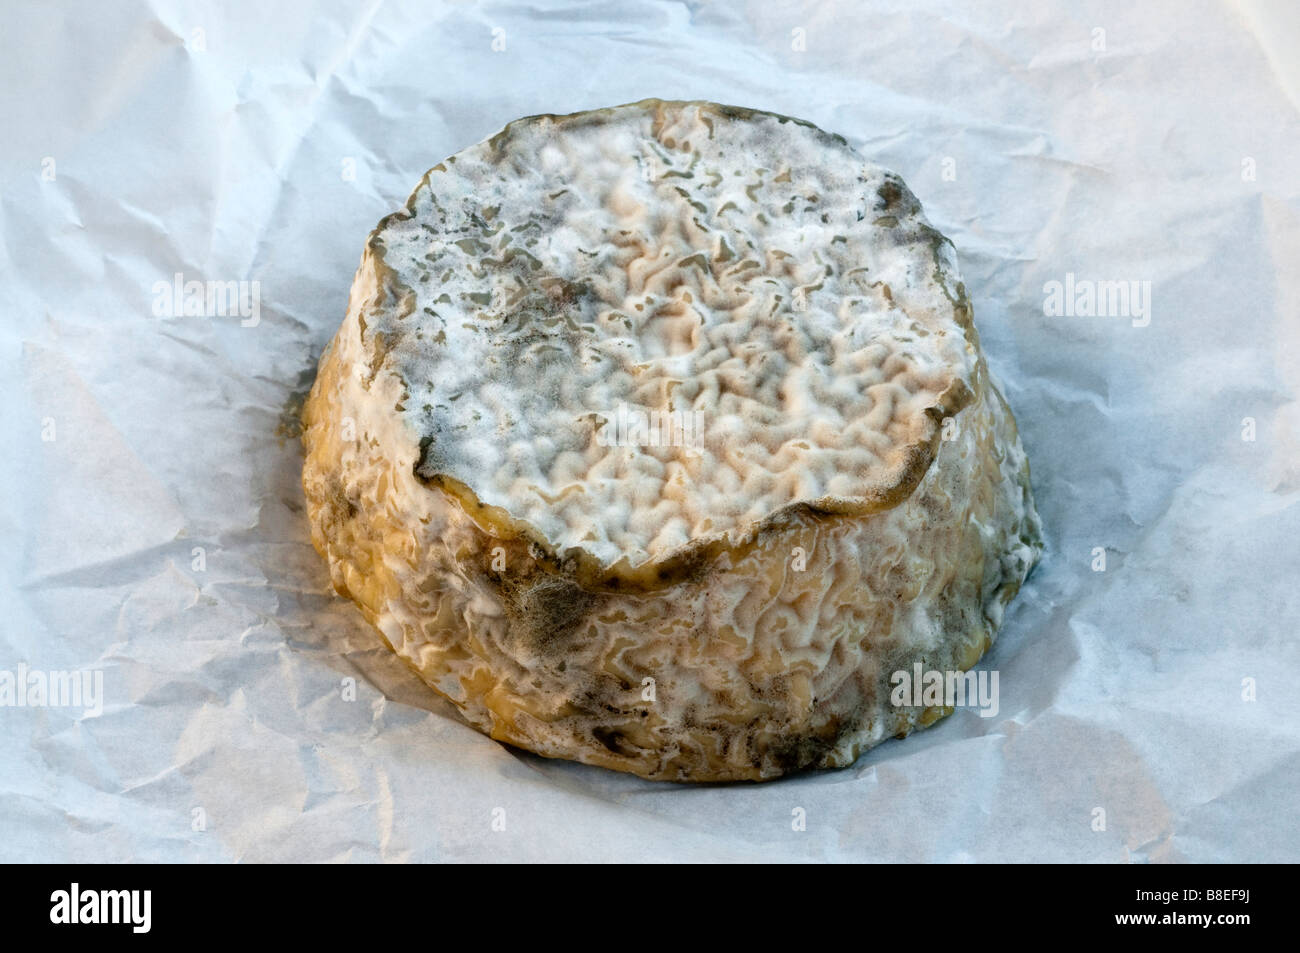 'Pave de la Brenne' / hand-made local goat's cheese from la Brenne, Indre, France. Stock Photo